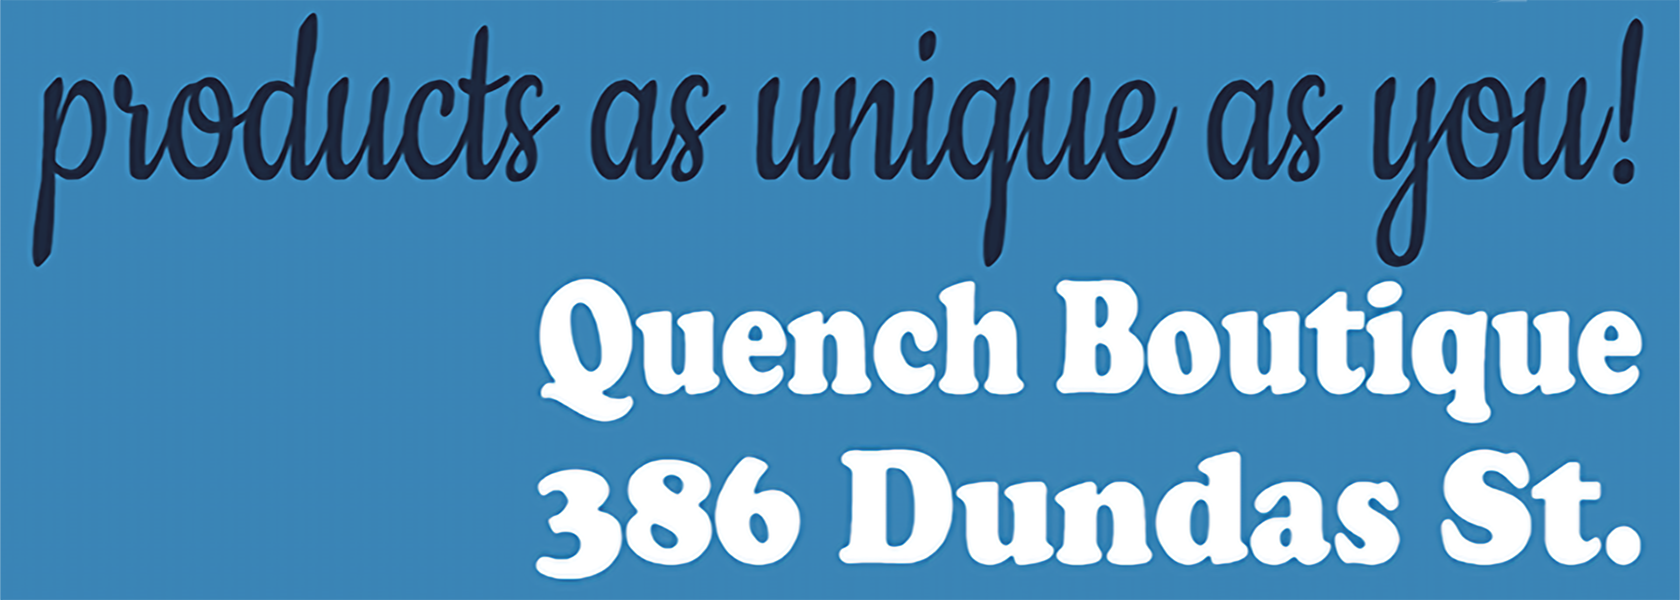 quench boutique gift shop - products as unique as you image - 386 dundas street, woodstock, ontario